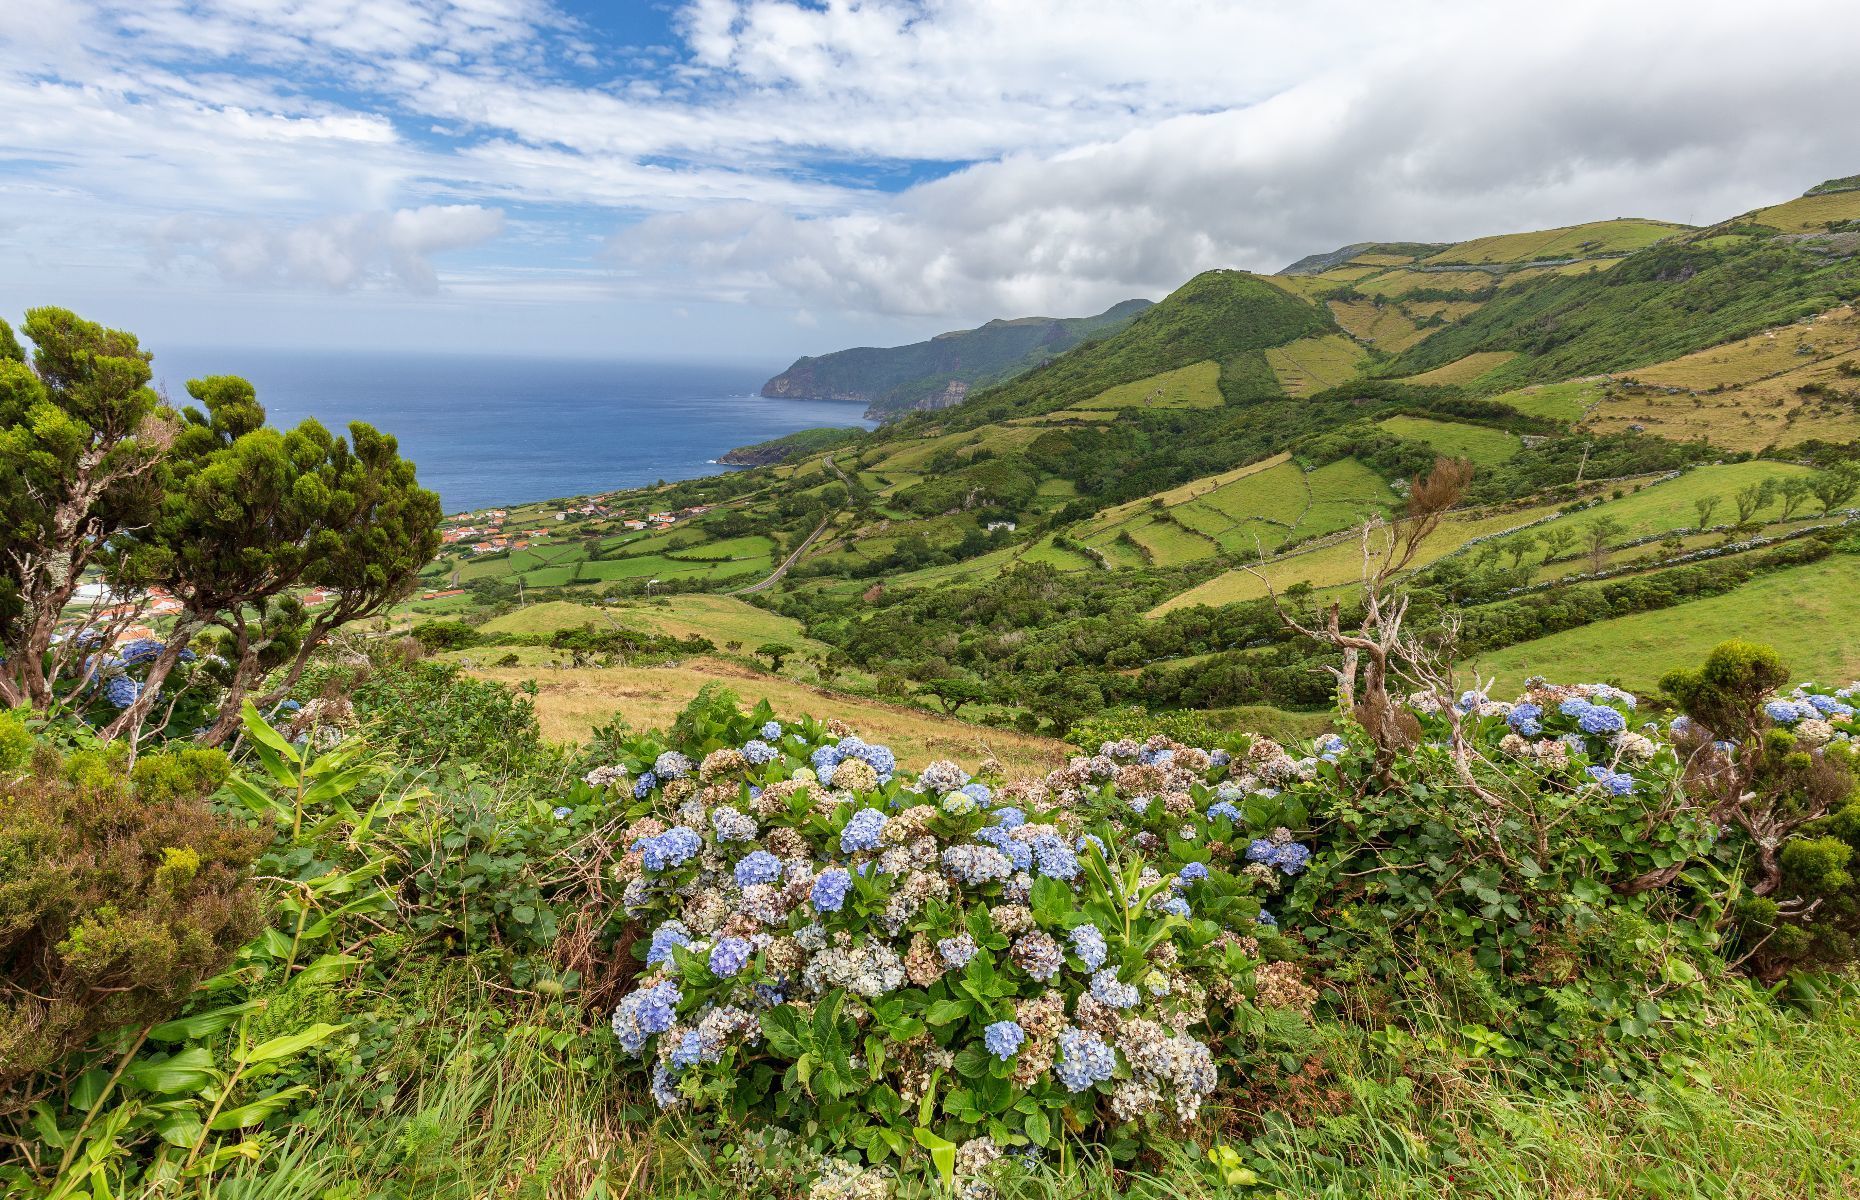 <p>“If there are places privileged by nature, the island of Flores is one of them,” declares <a href="https://www.visitportugal.com/en/node/73821" rel="noreferrer noopener">Visit Portugal</a> about this stunning spot in the Azores archipelago. For flower lovers, Flores (which literally translates to flowers) Island is the ultimate garden.</p>